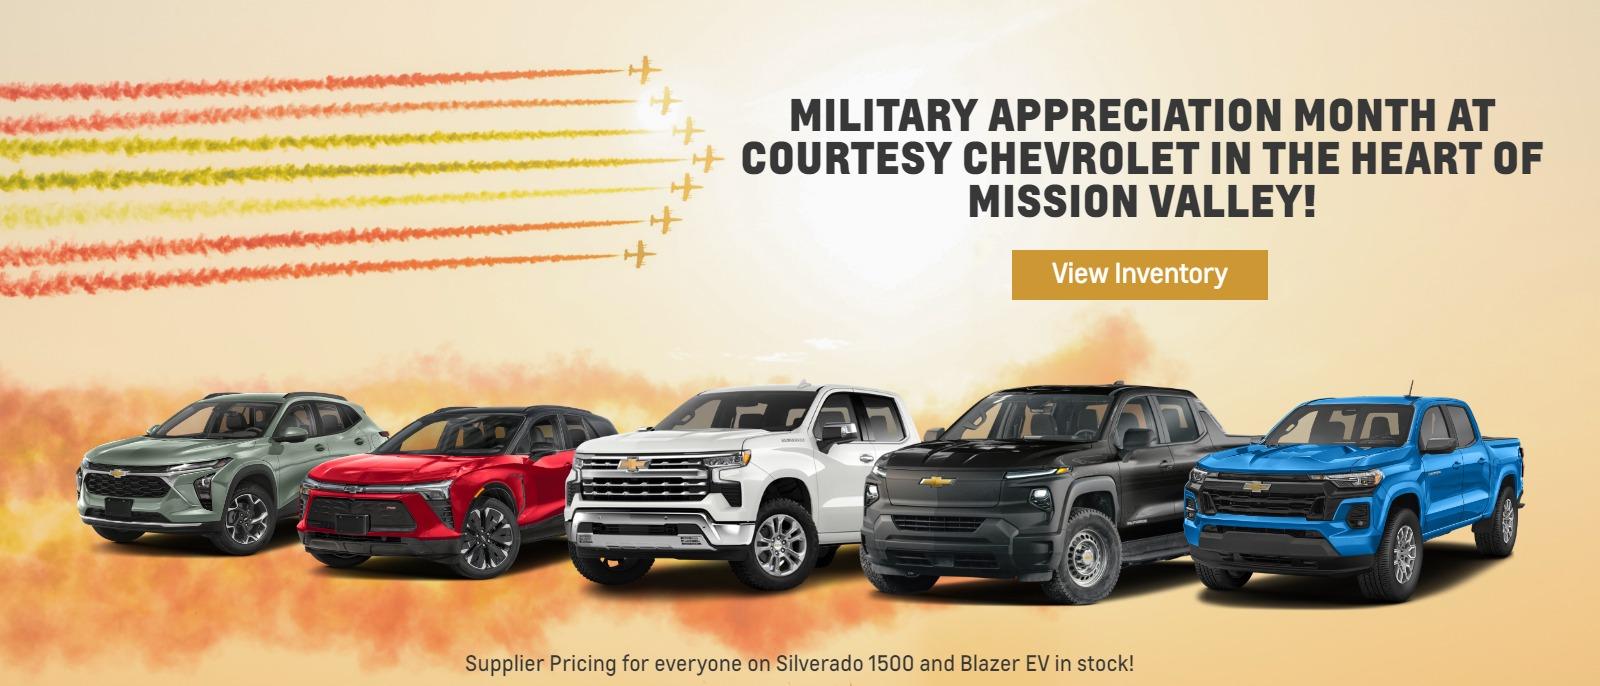 Military Appreciation Month at Courtesy Chevrolet IN the Heart of Mission Valley!
Supplier Pricing for everyone on Silverado 1500 and Blazer EV in stock!